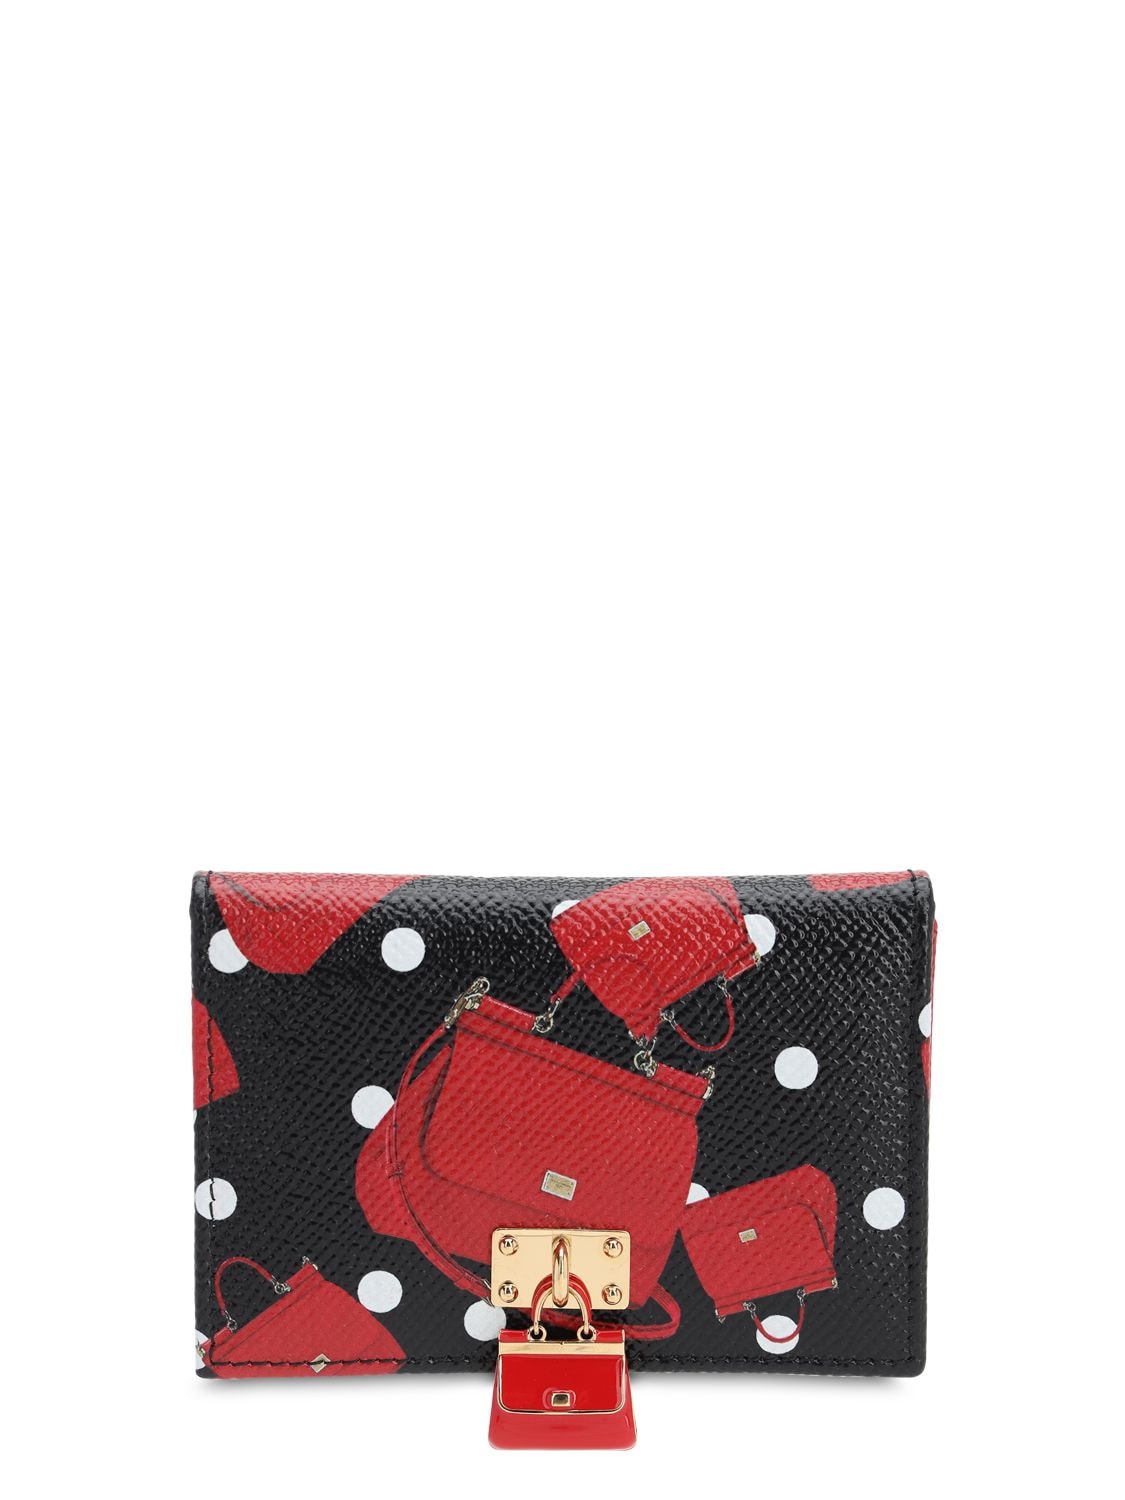 Dolce & Gabbana Crazy For Sicily Leather Card Holder In Multicolor